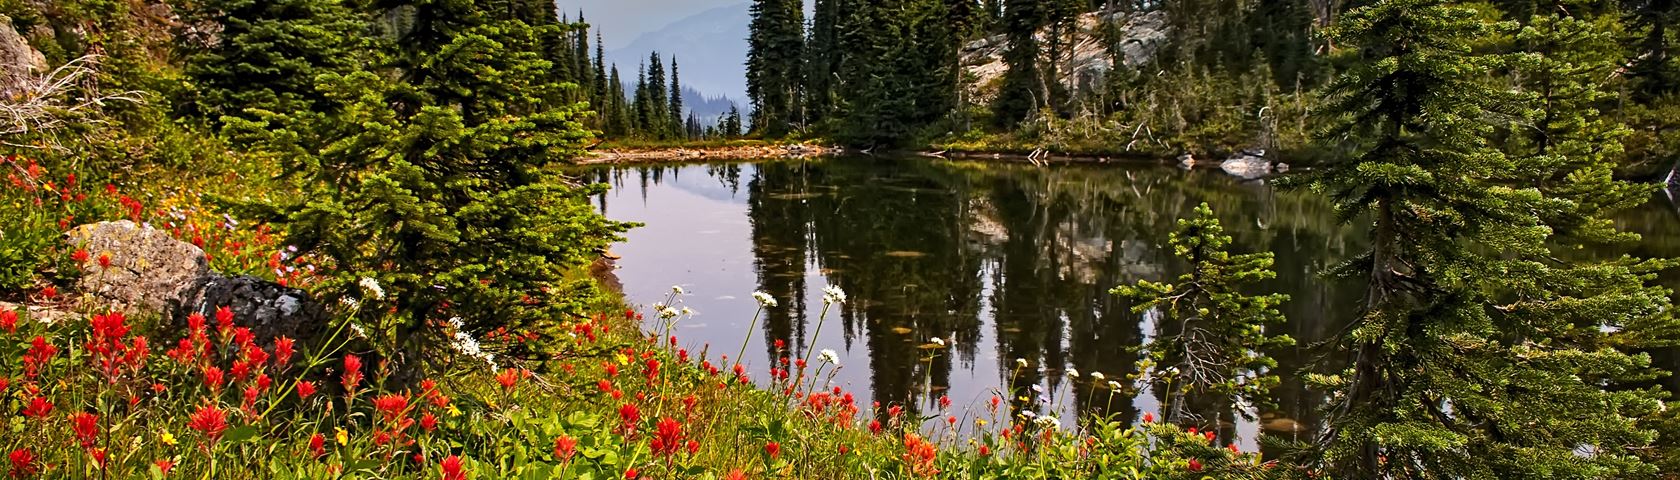 Wild Flower and a Lake